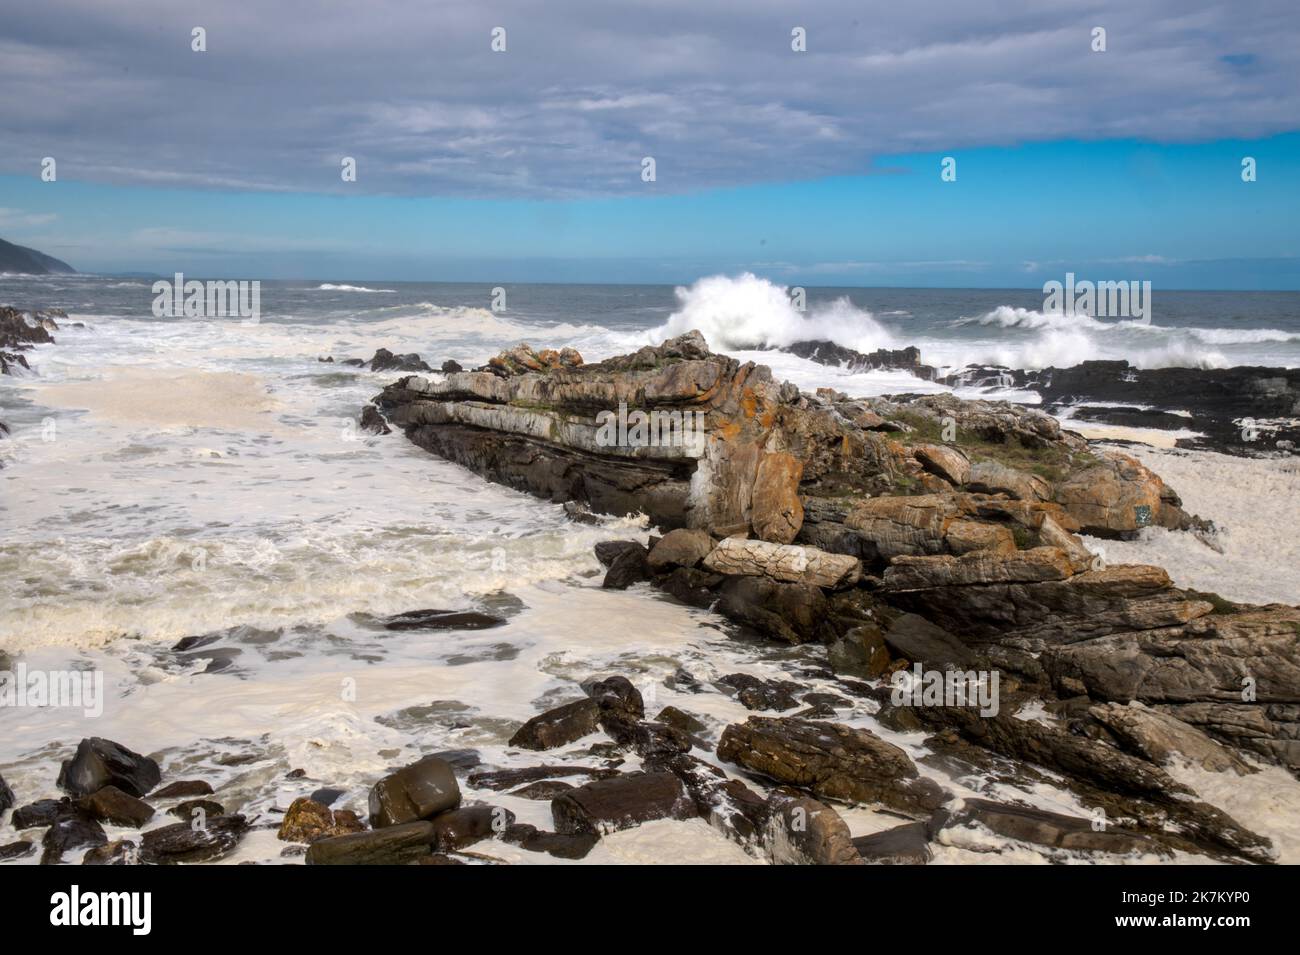 Tides in at Storms River with tide in and massive breakers crashing on the rocky shoreline. Low shutter speed with leading lines and foamy surf Stock Photo